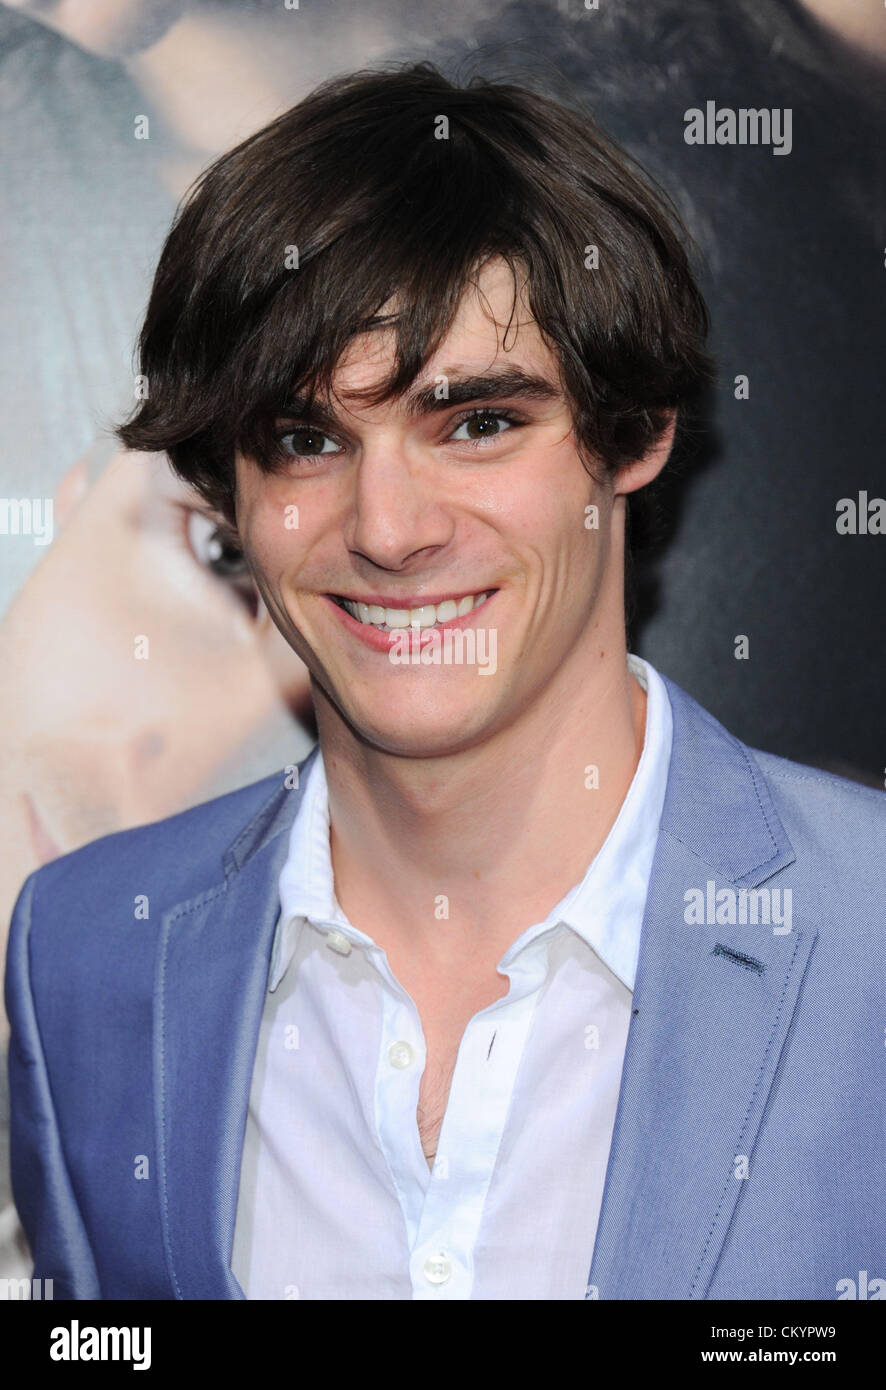 Los Angeles, USA. 4th September 2012. R J Mitte at 'The Words' film ...